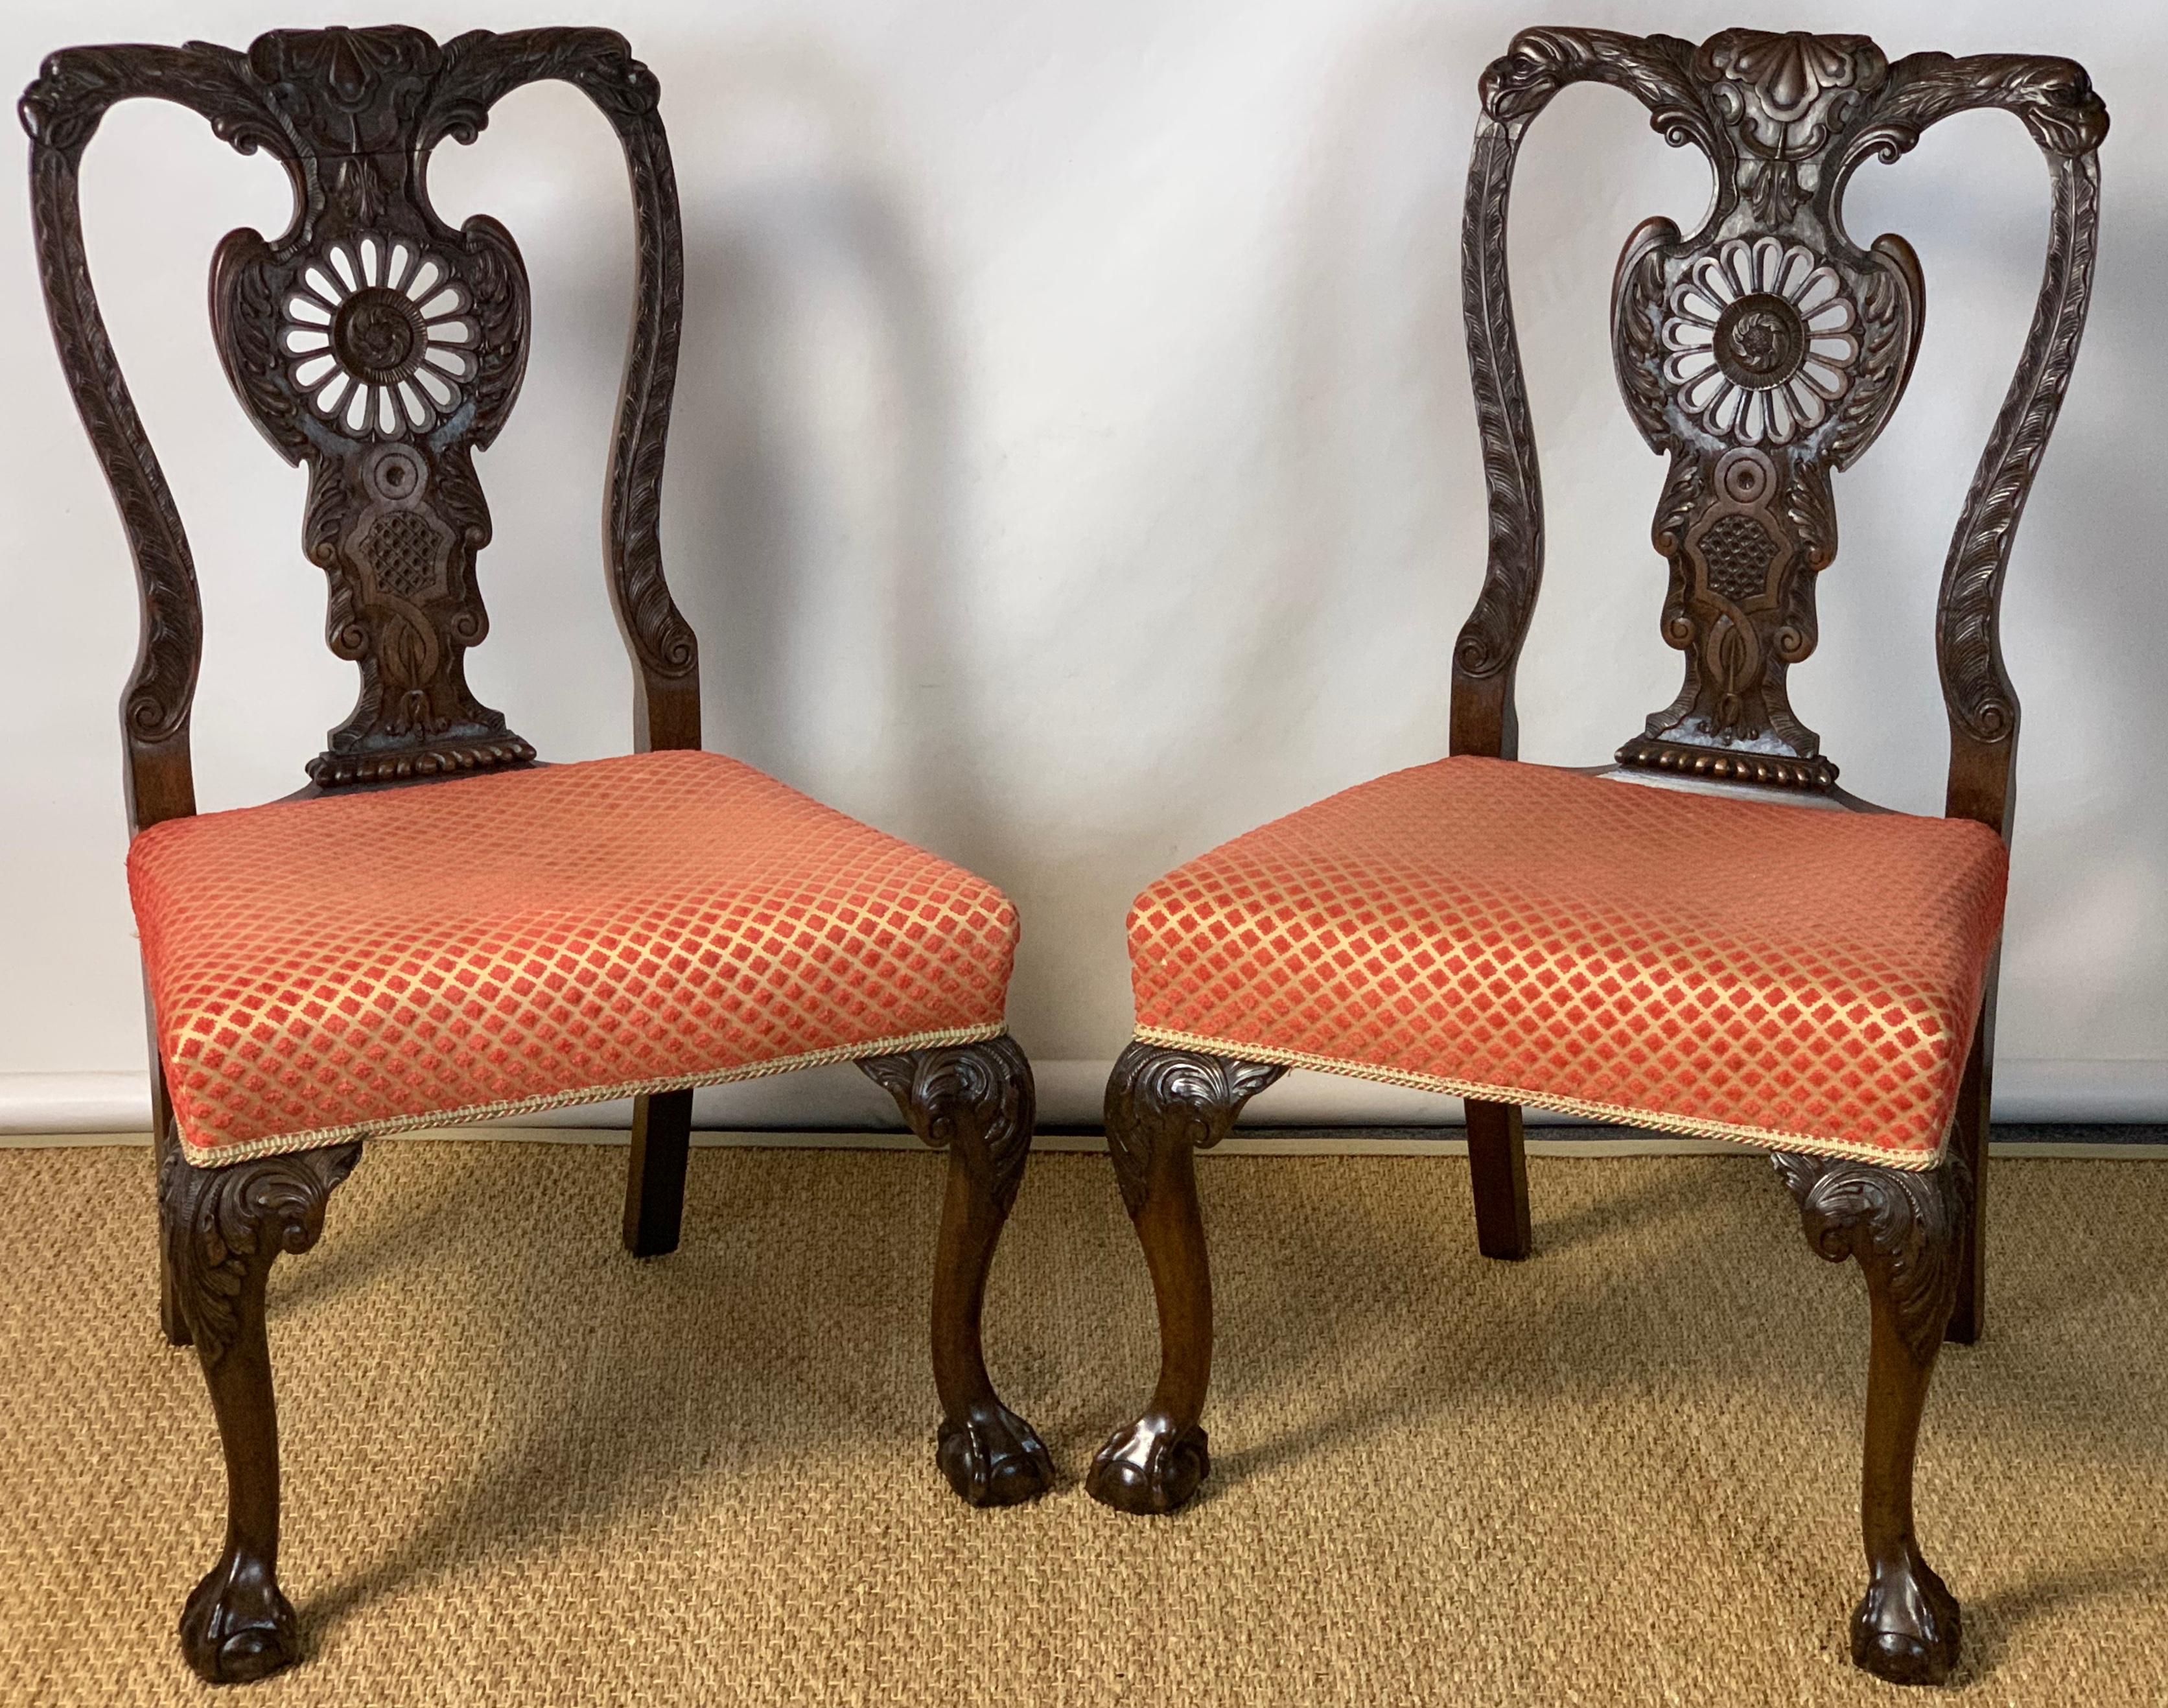 A fine pair of mid-19th century English elaborately carved Chippendale style mahogany side chairs upholstered in a coral and gold colored fabric.